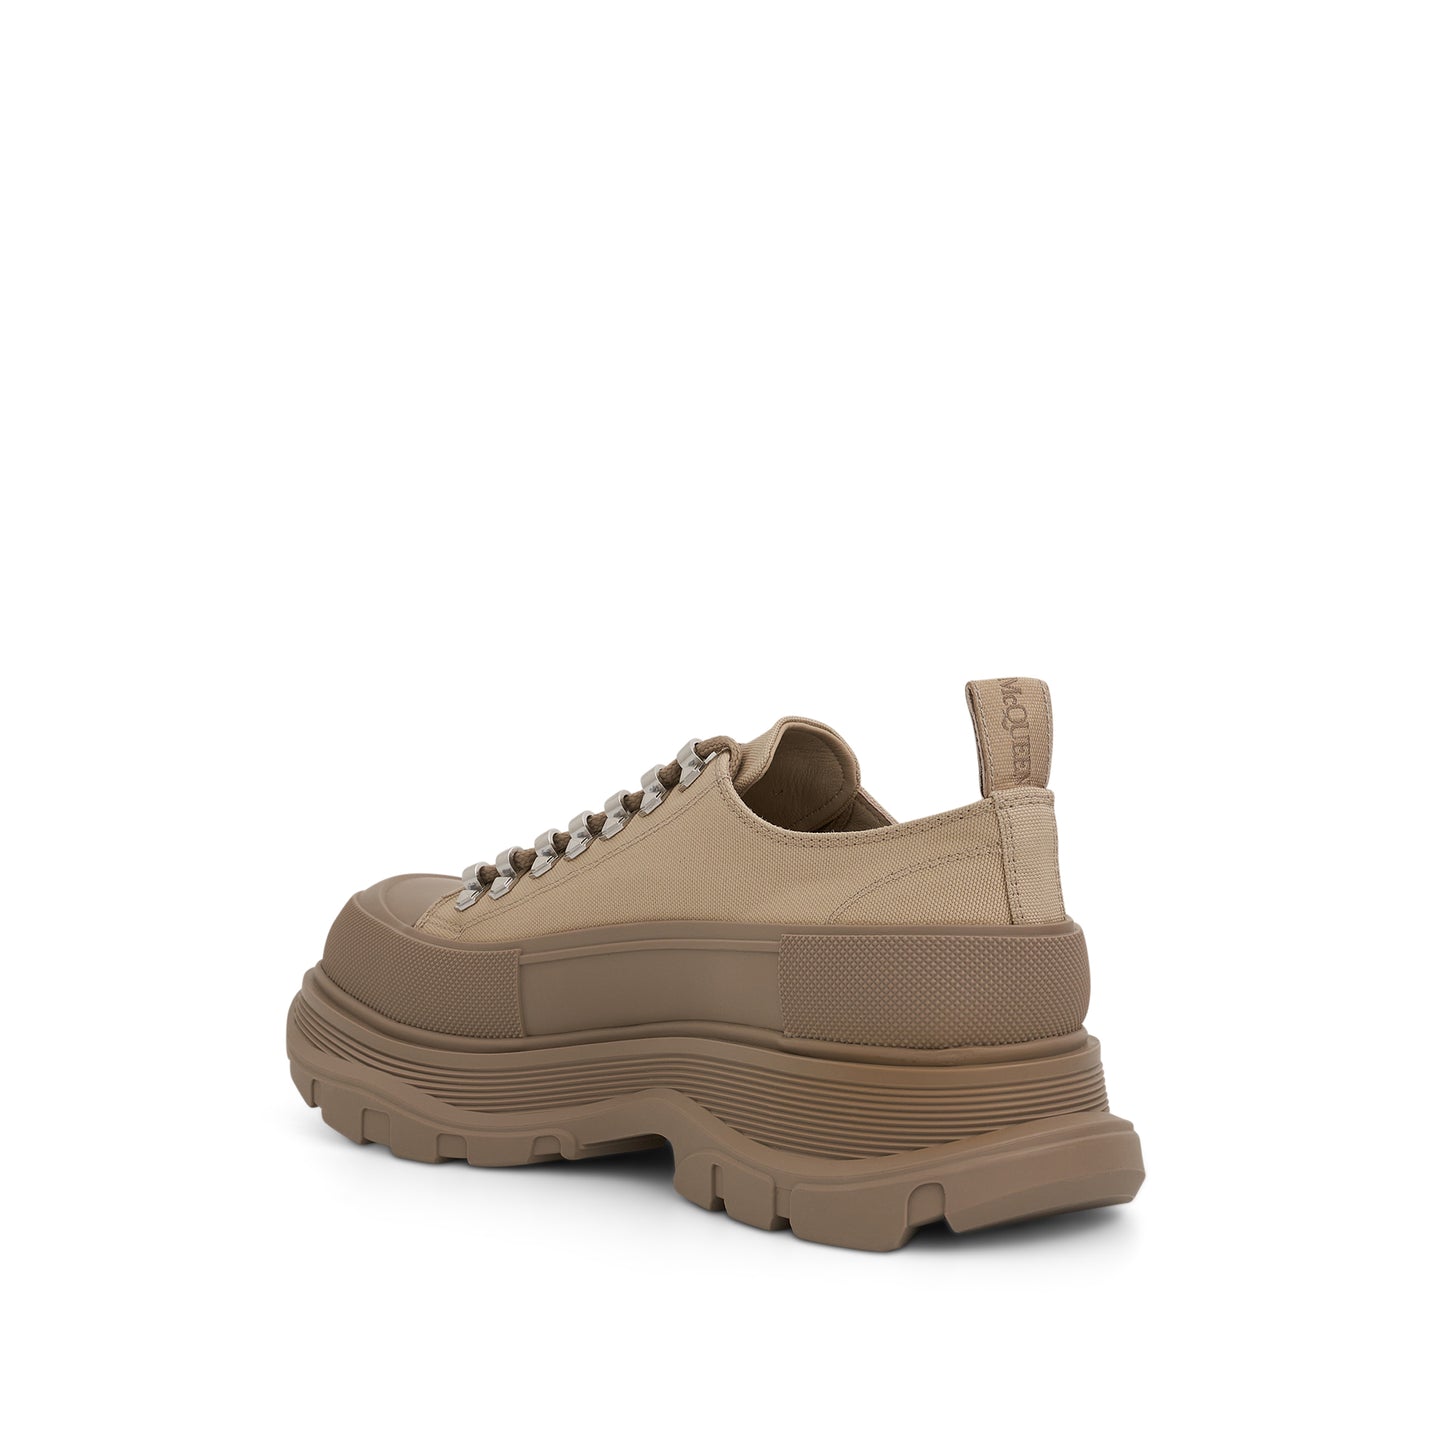 Tread Slick Lace Up Shoe in Sand/Stone